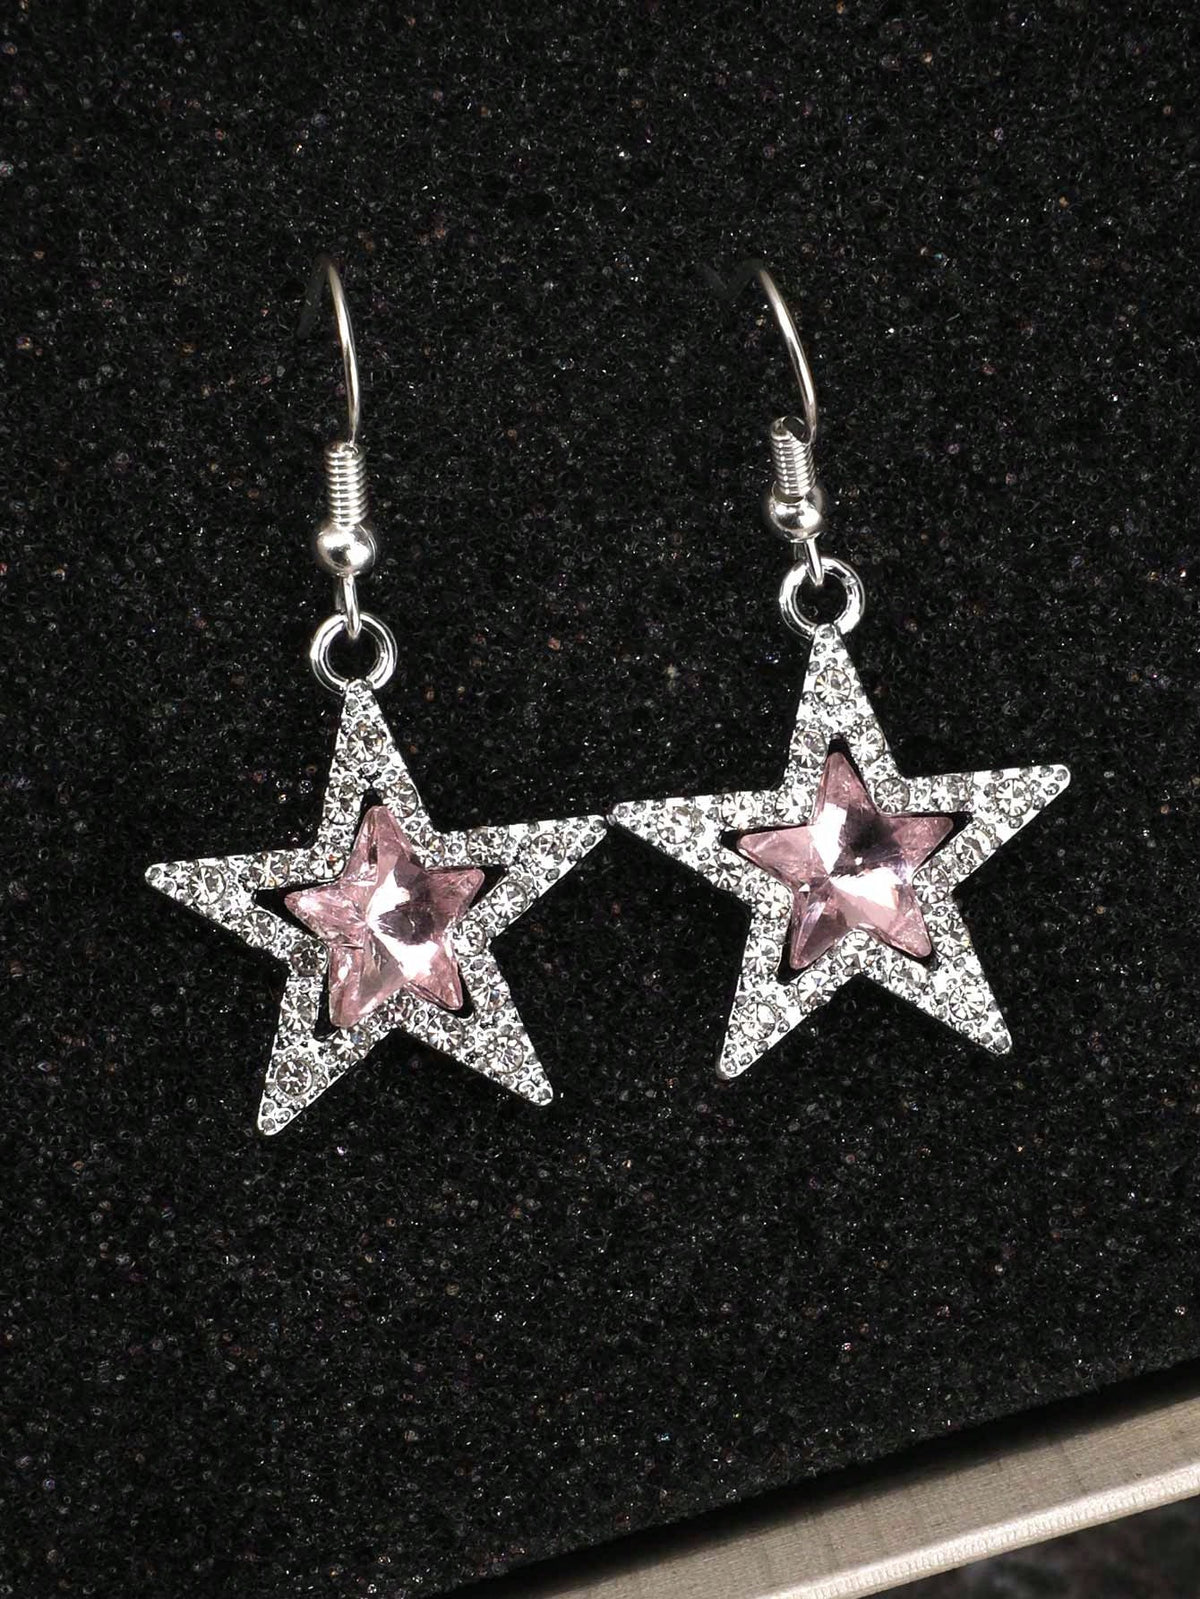 ROMWE Goth 1pair Retro Gothic Rock Style Star Shaped Earrings With Rhinestone Detail